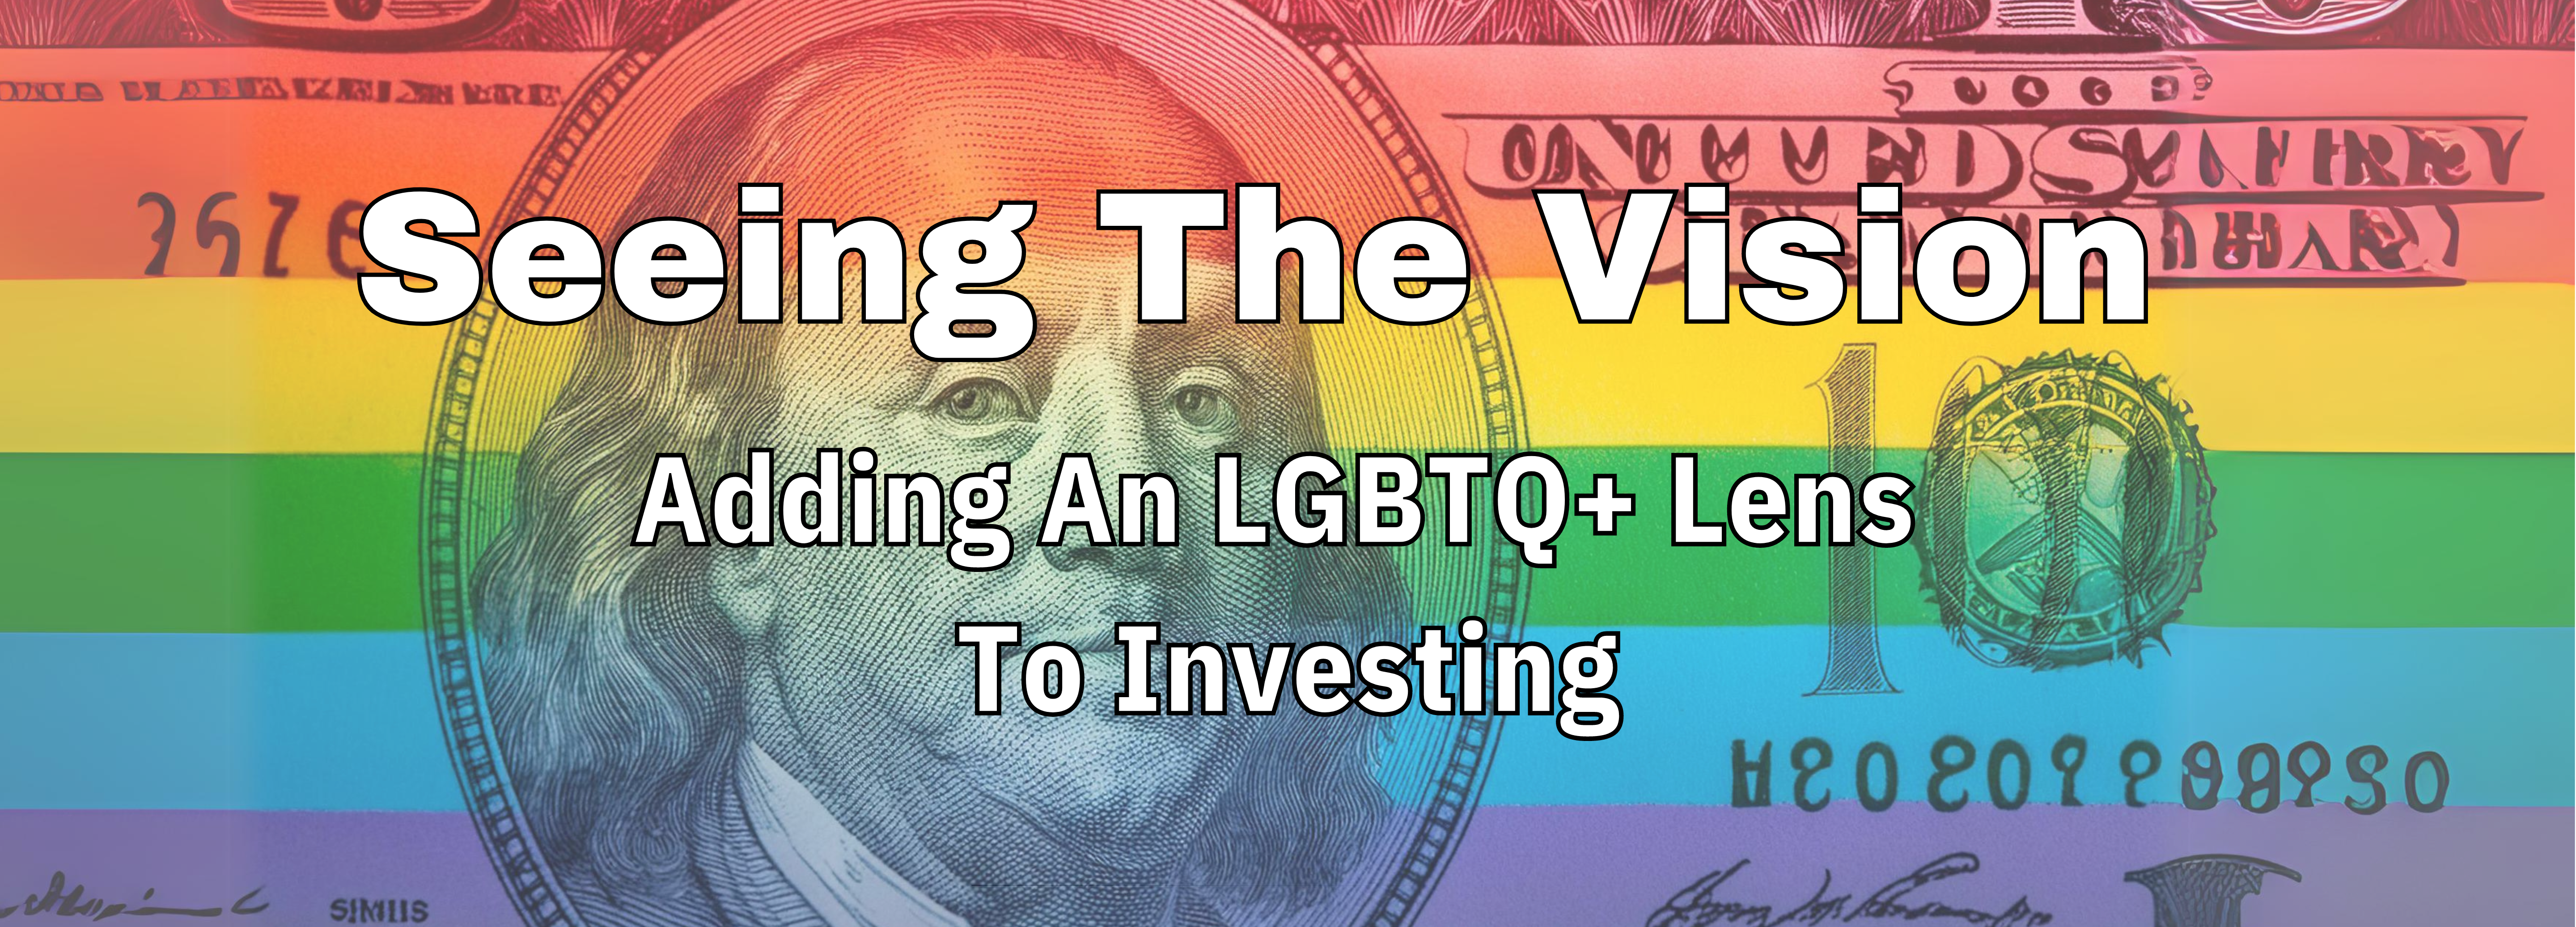 Seeing The Vision: Adding An LGBTQ+ Lens To Investing